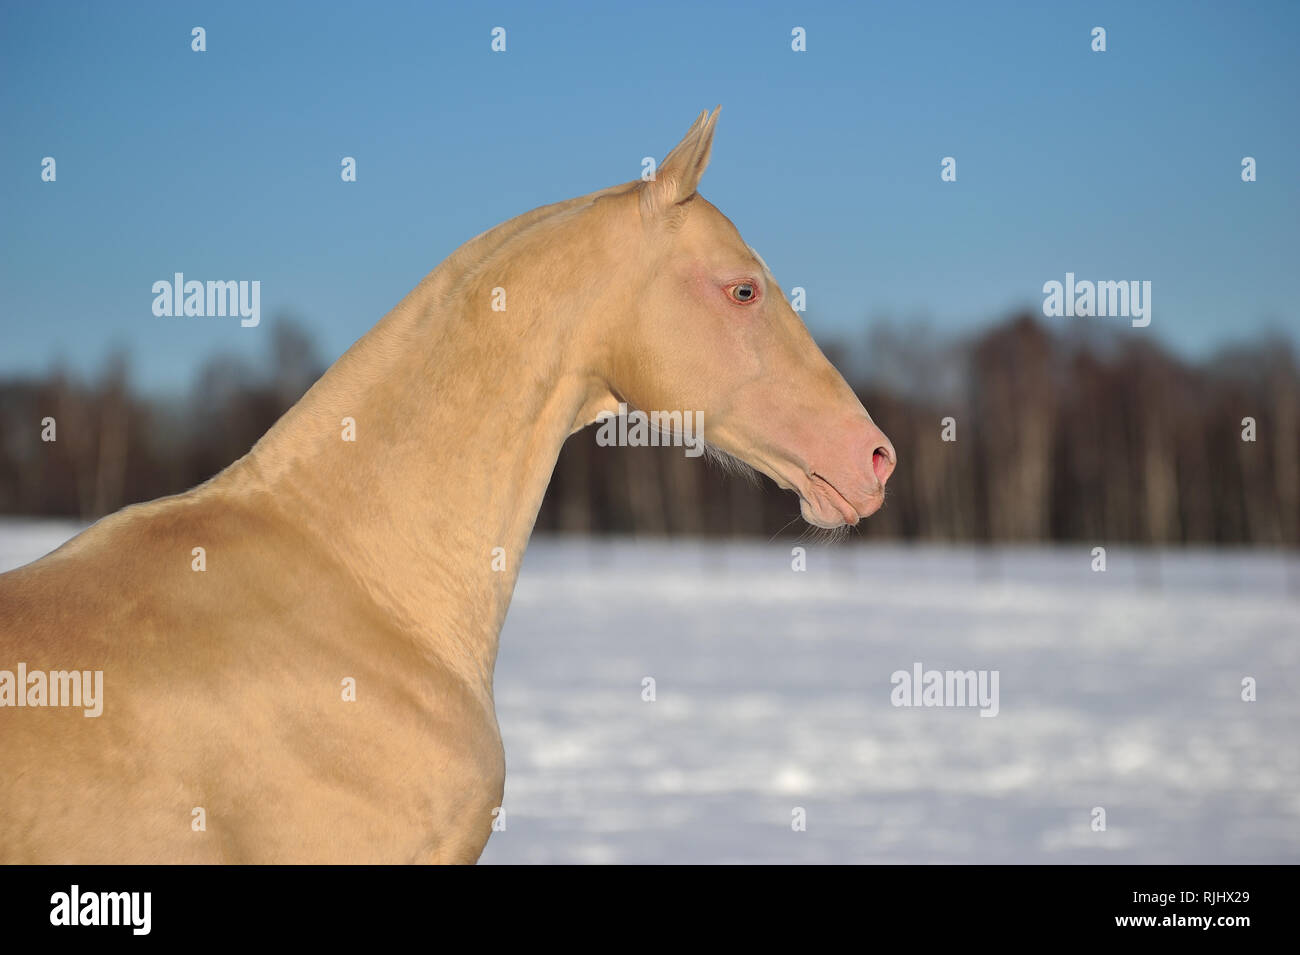 Cremello Akhal Teke horse stands in the winter pasture in the chill sunny day. Horizontal, portrait, side view. Stock Photo